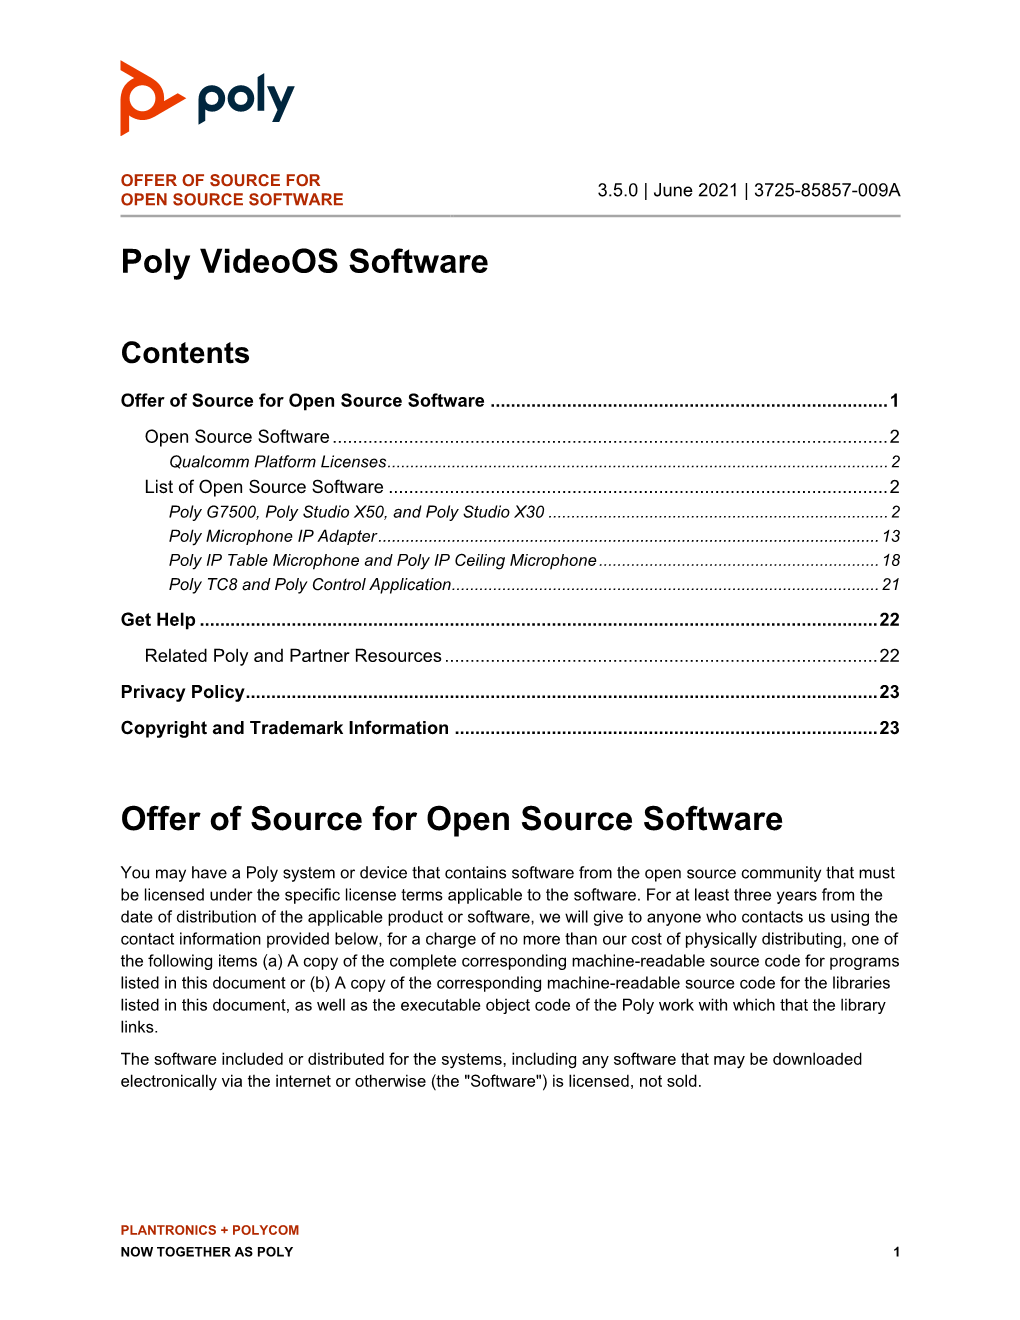 Poly Videoos Software Offer of Source for Open